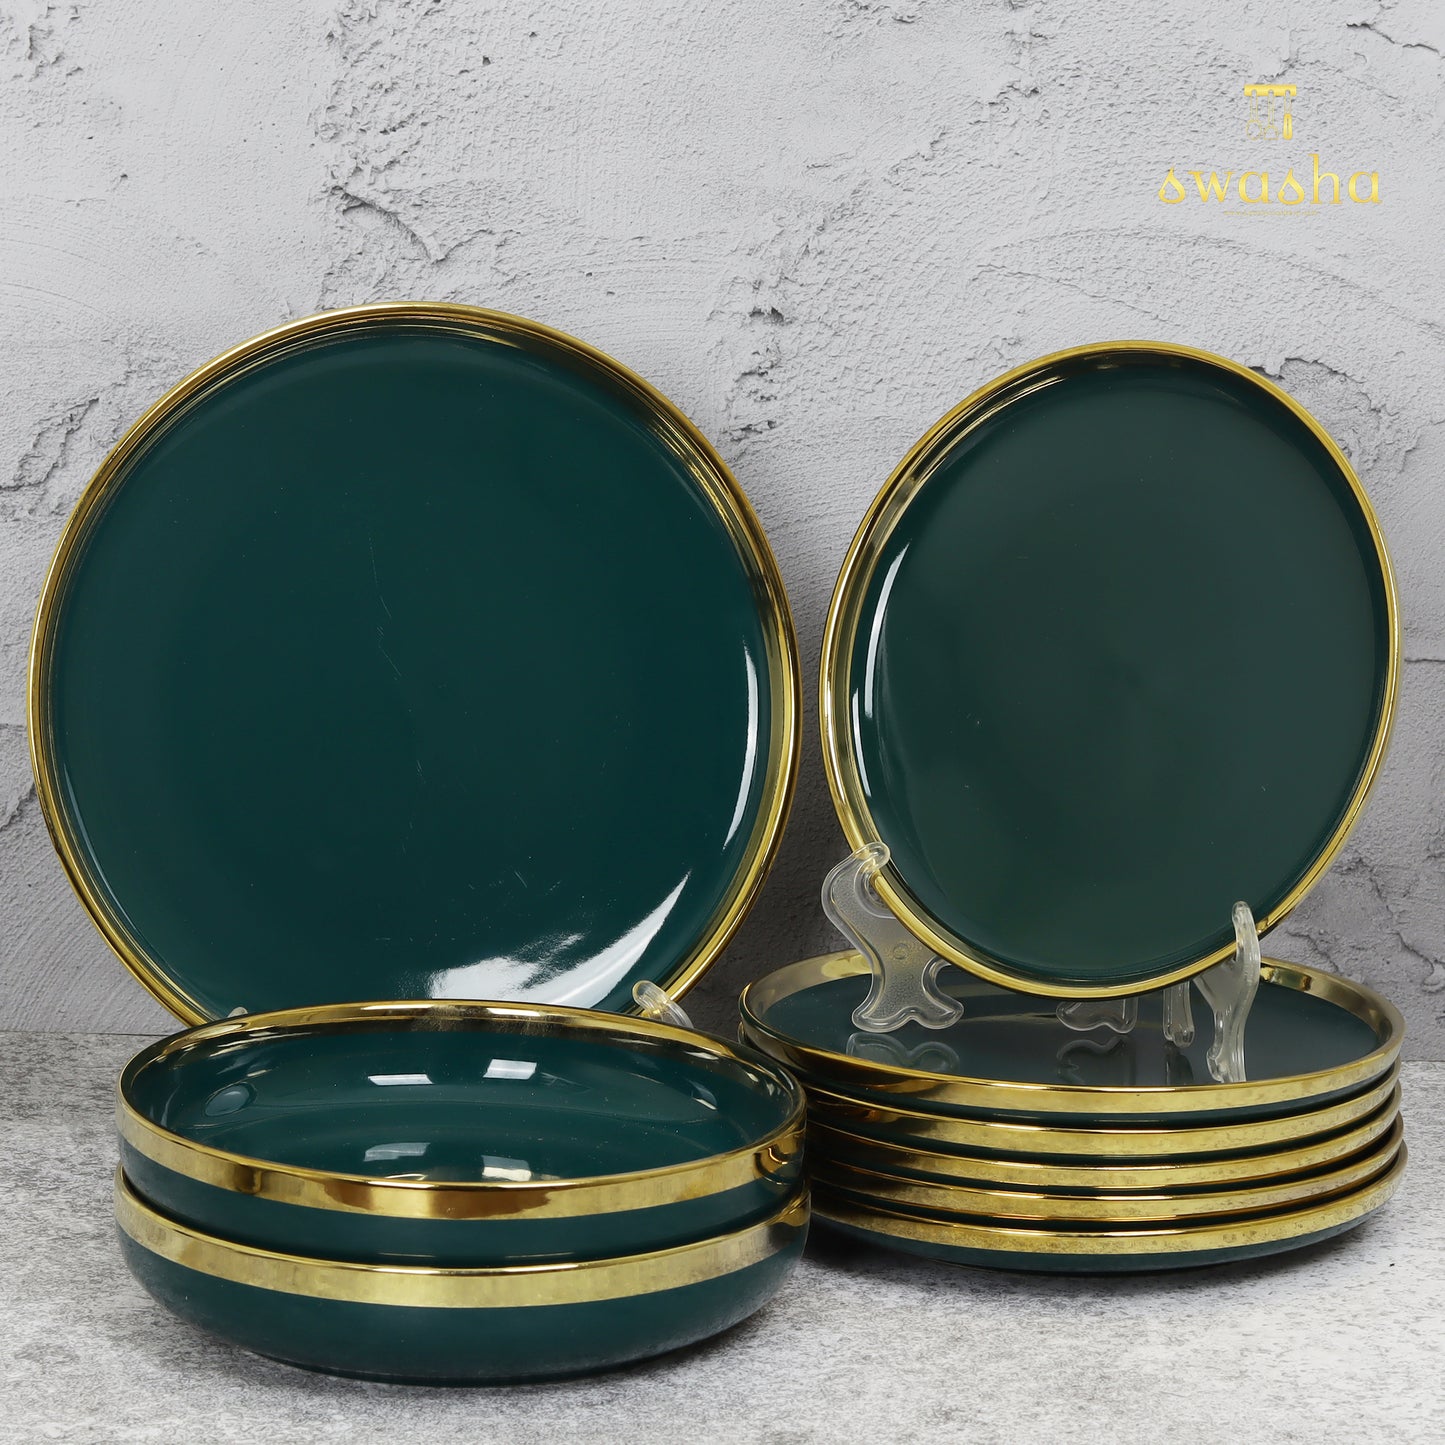 Personalized 9-piece ceramic dinner set - elevate dining with your unique touch